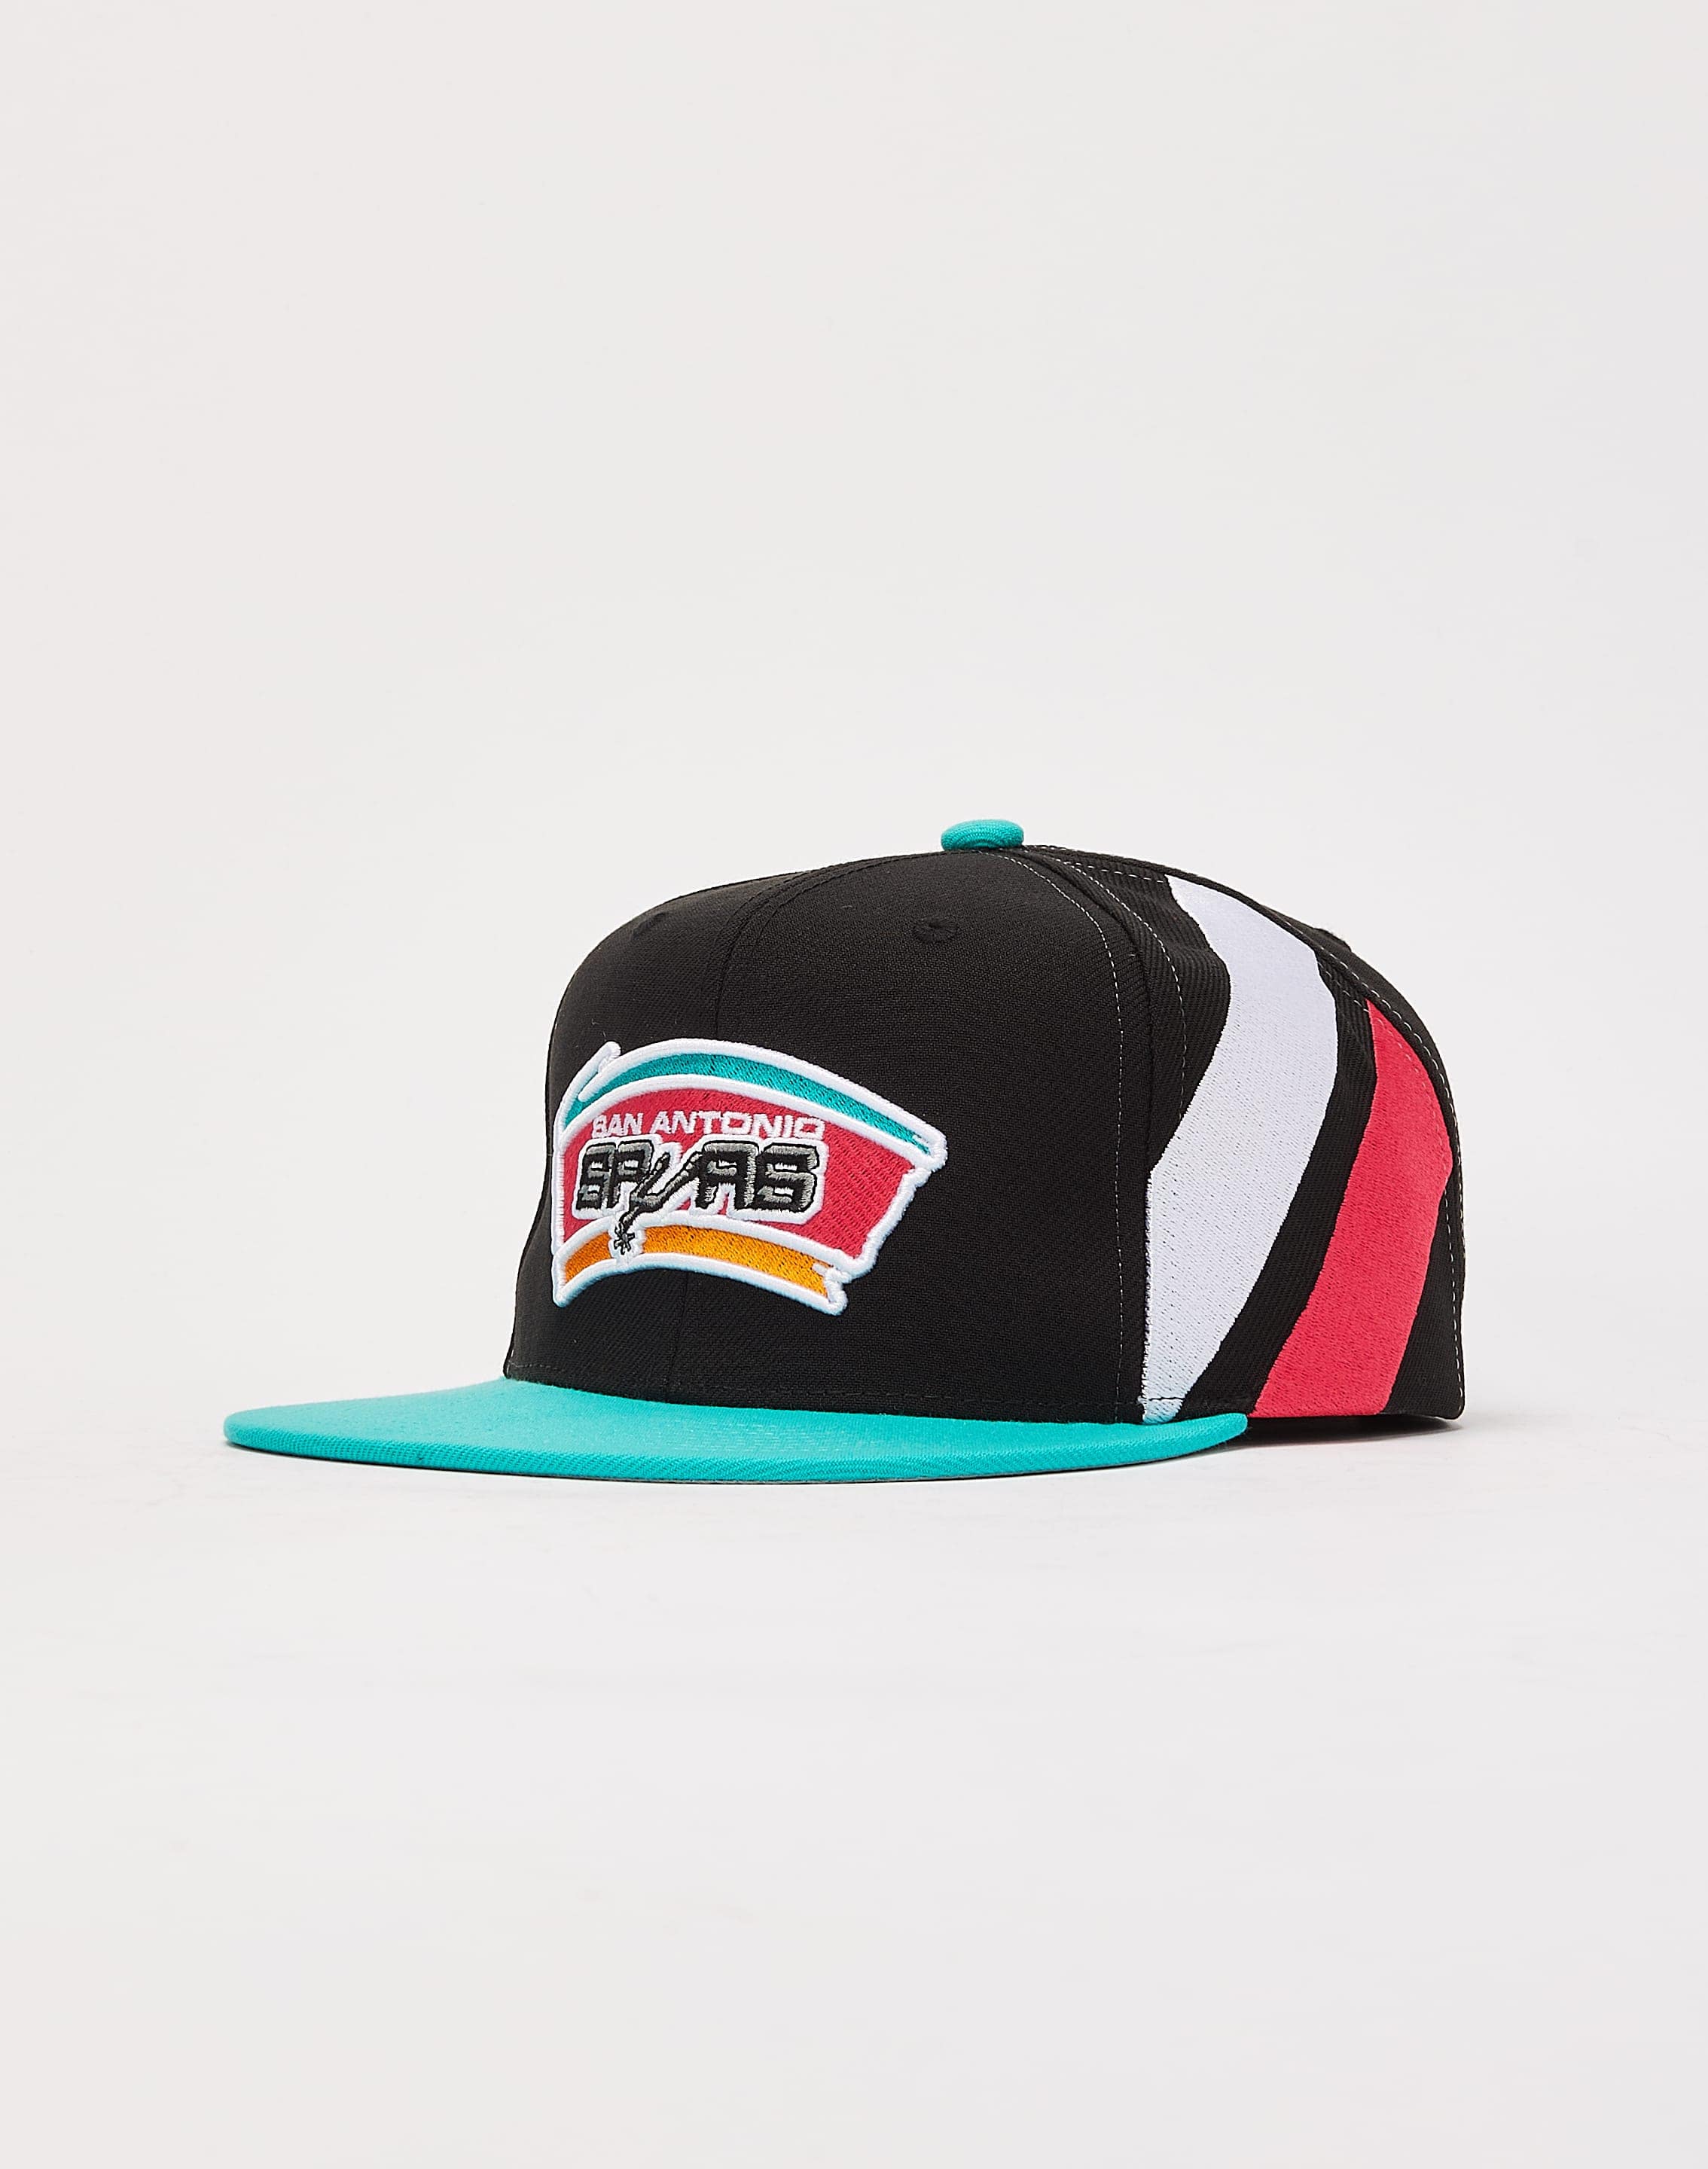 San Antonio Spurs Mitchell & Ness NBA Team Side fitted hat cap